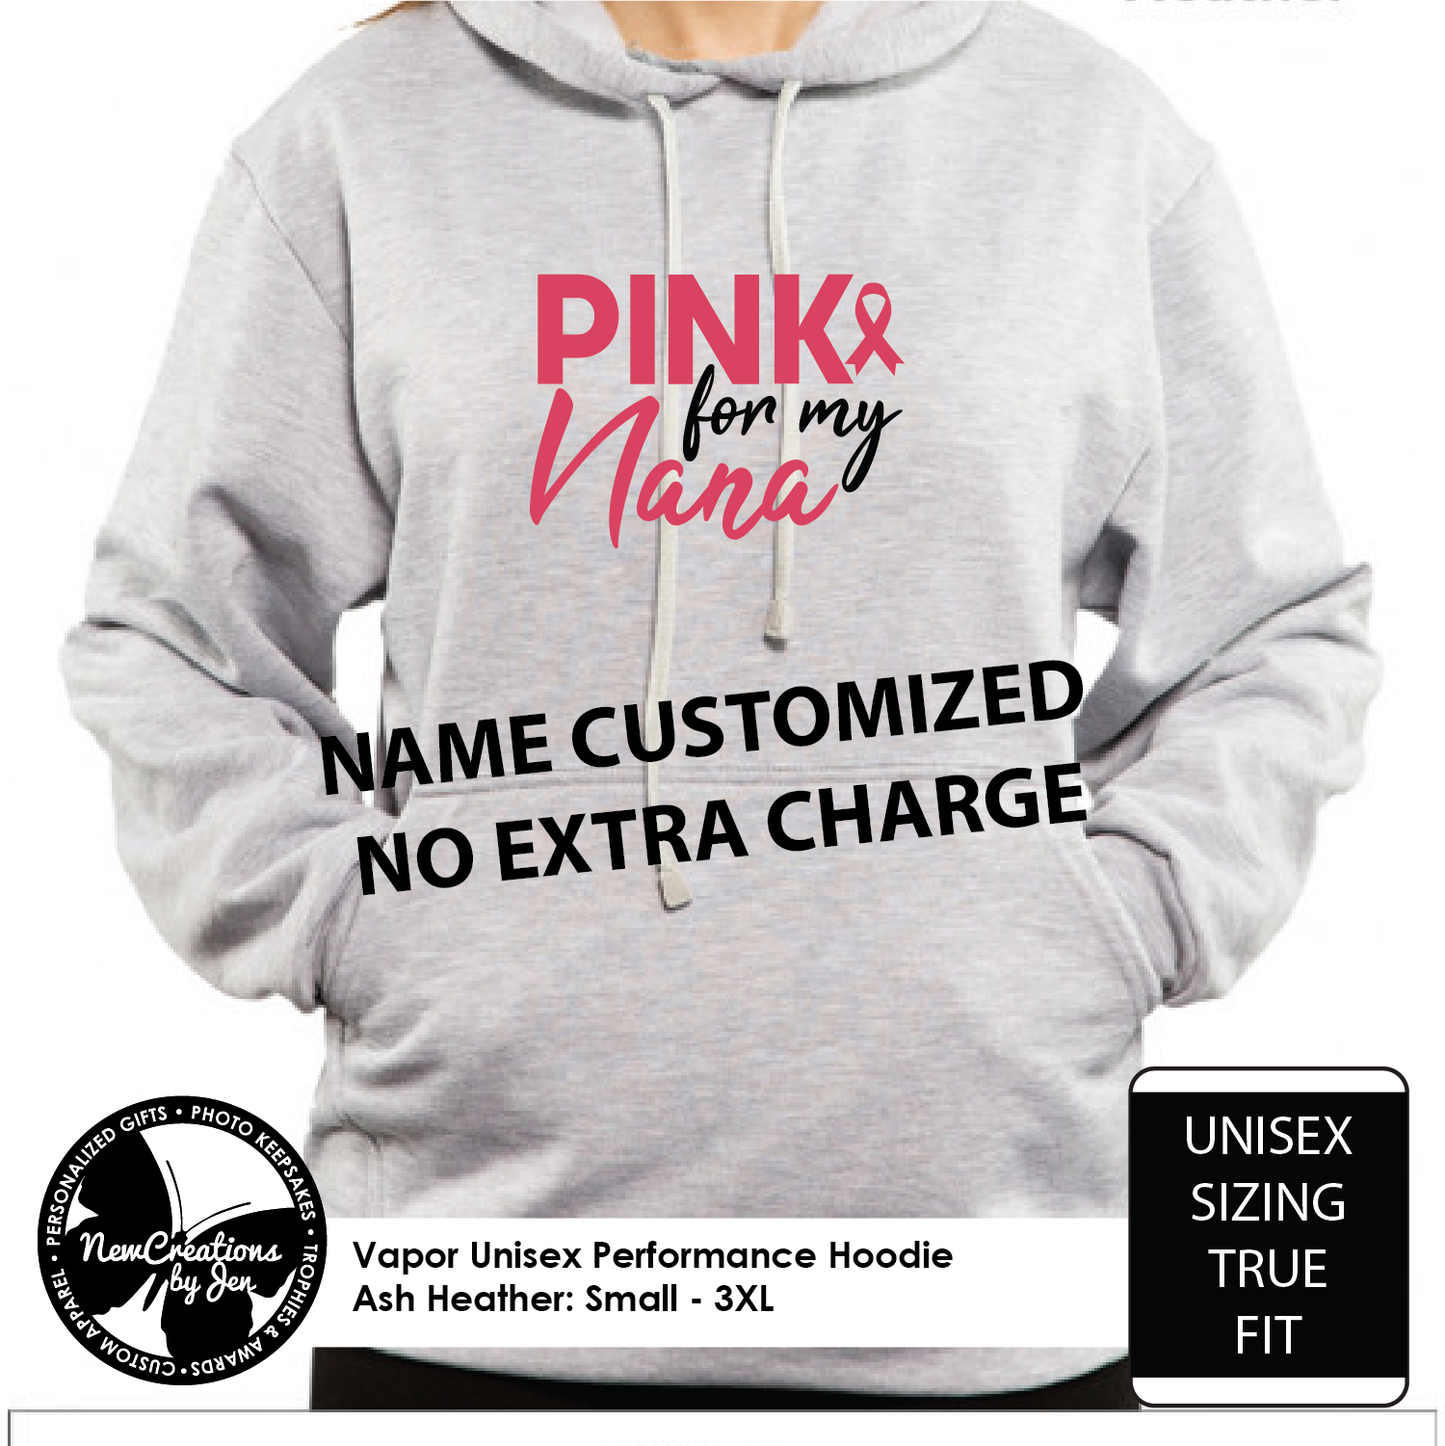 Pink for Nana - Name customized no extra charge